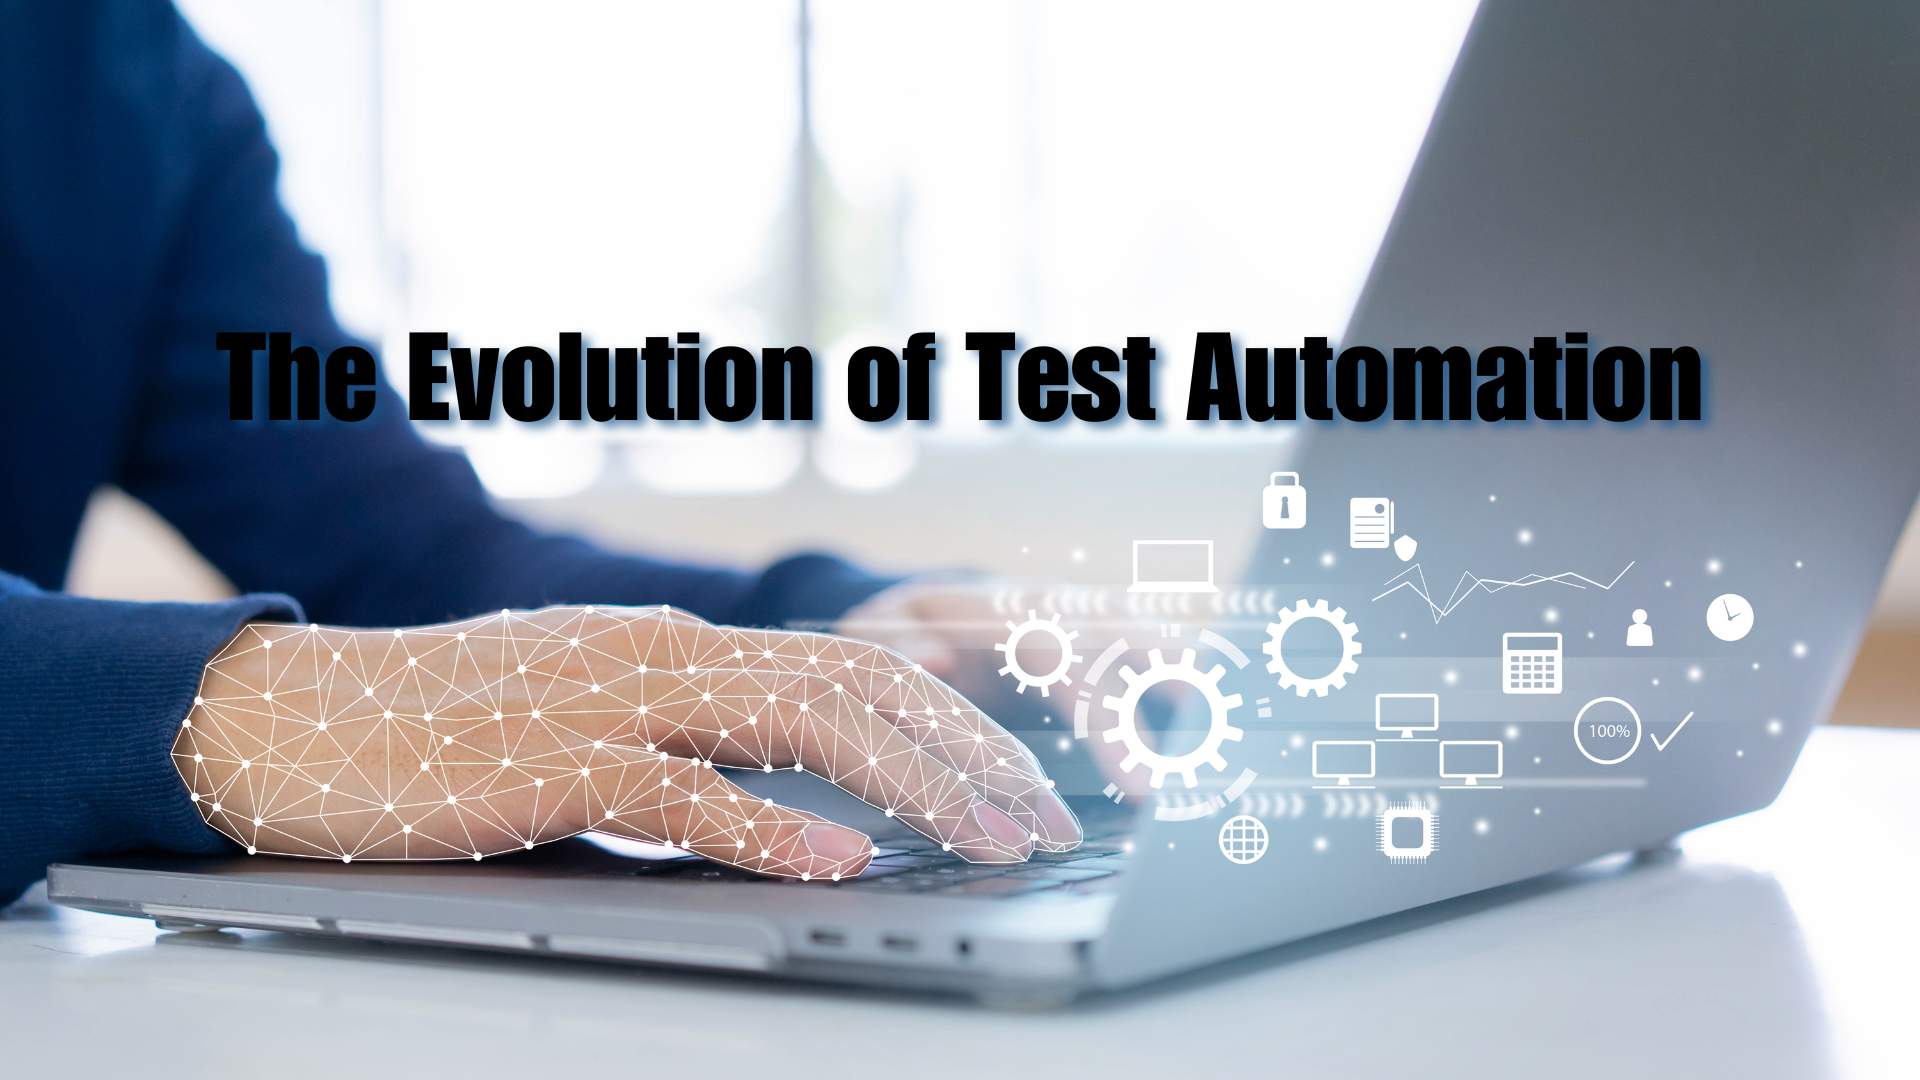 Image showing a person working on their laptop to emphasize on The Evolution of Test Automation